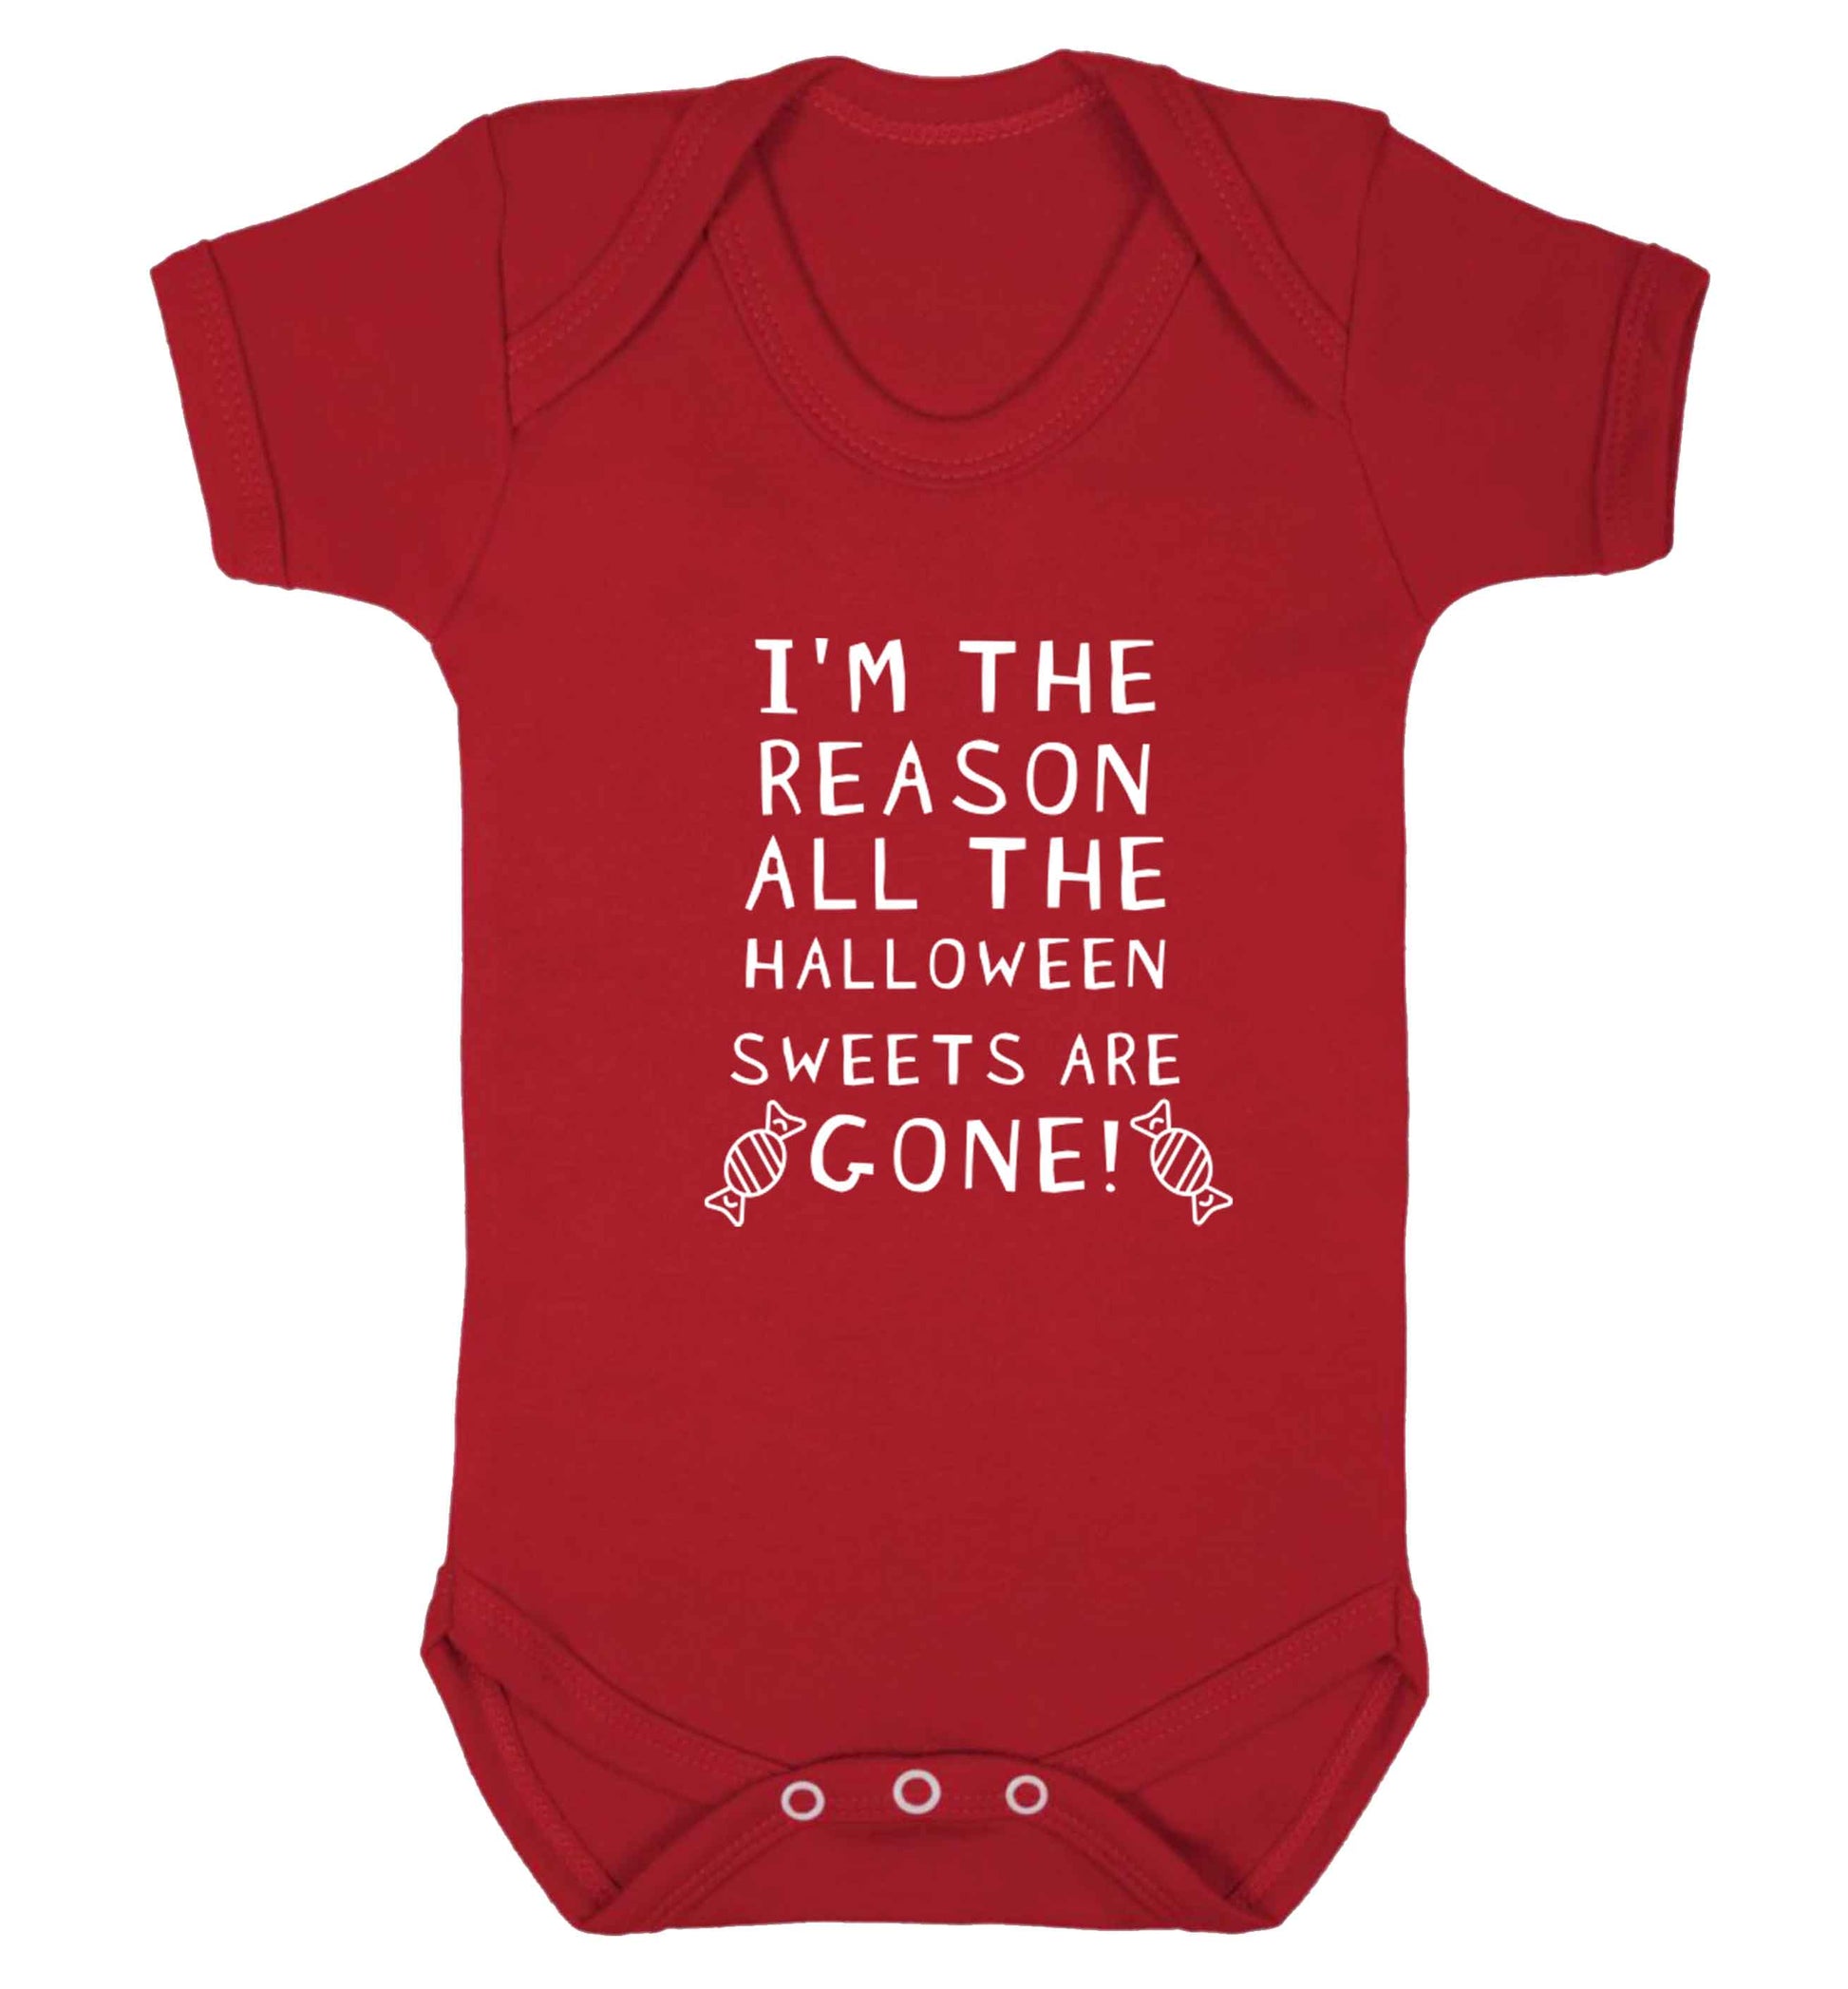 I'm the reason all of the halloween sweets are gone baby vest red 18-24 months